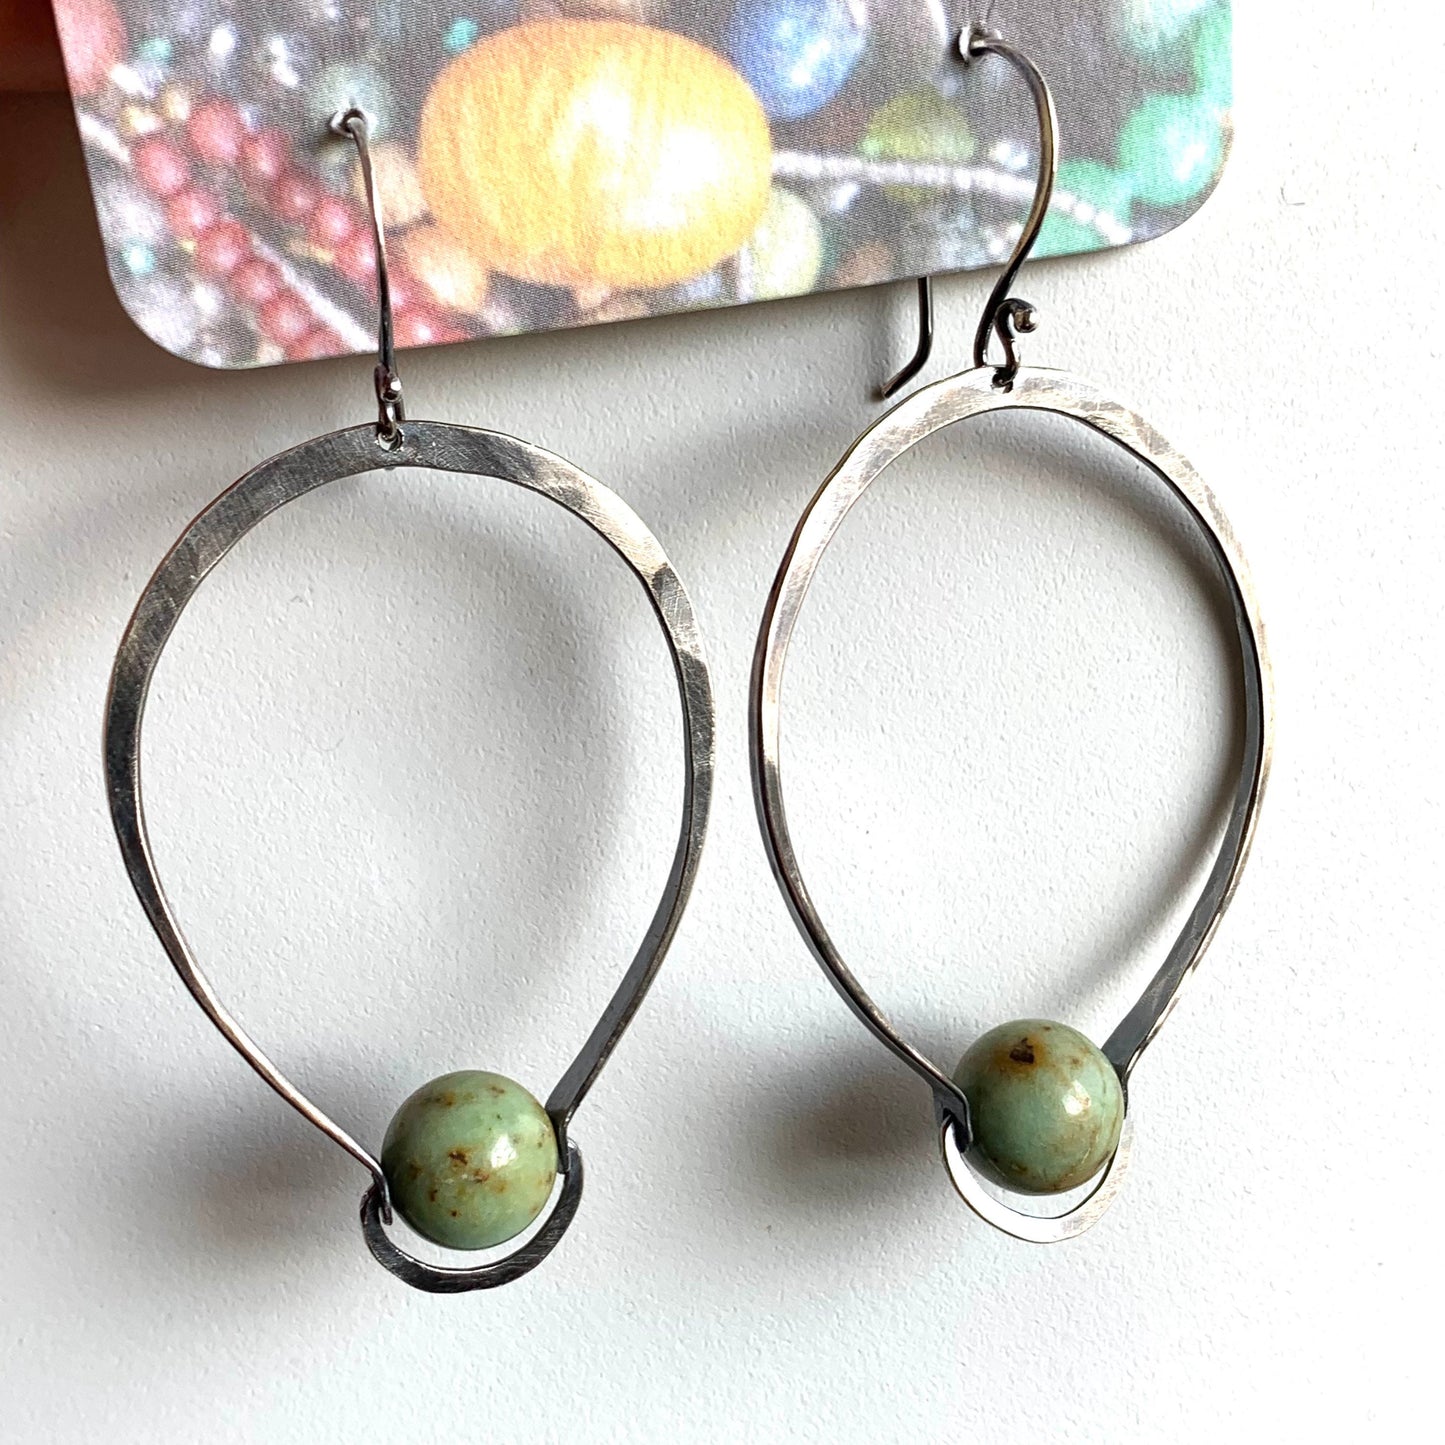 Handmade silver earrings with turquoise bead - forged sterling jewelry - one of a kind design -  silver boho style - gifts for mom - unique